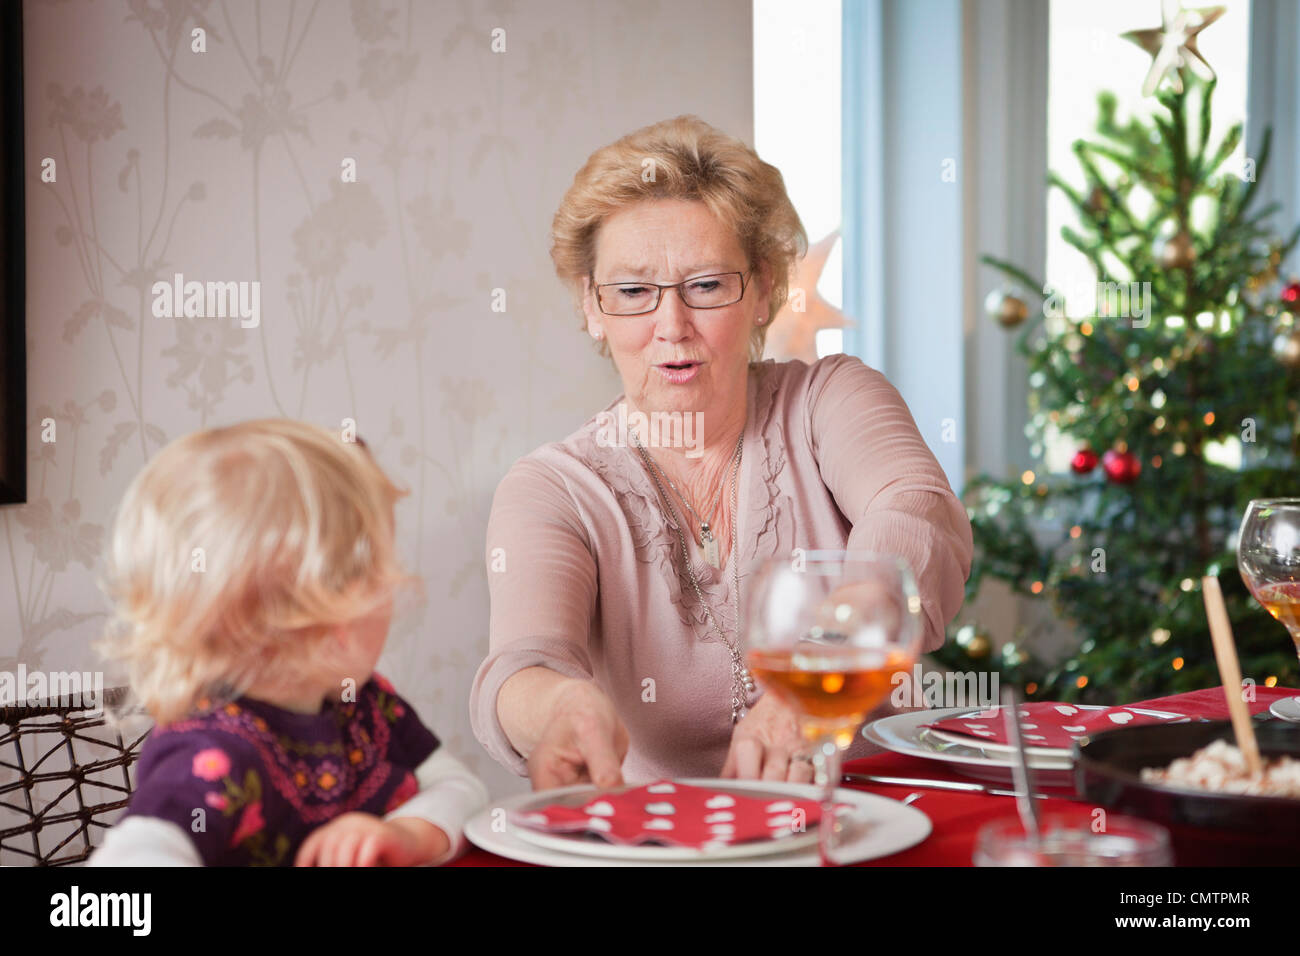 Two people on dinner table Stock Photo